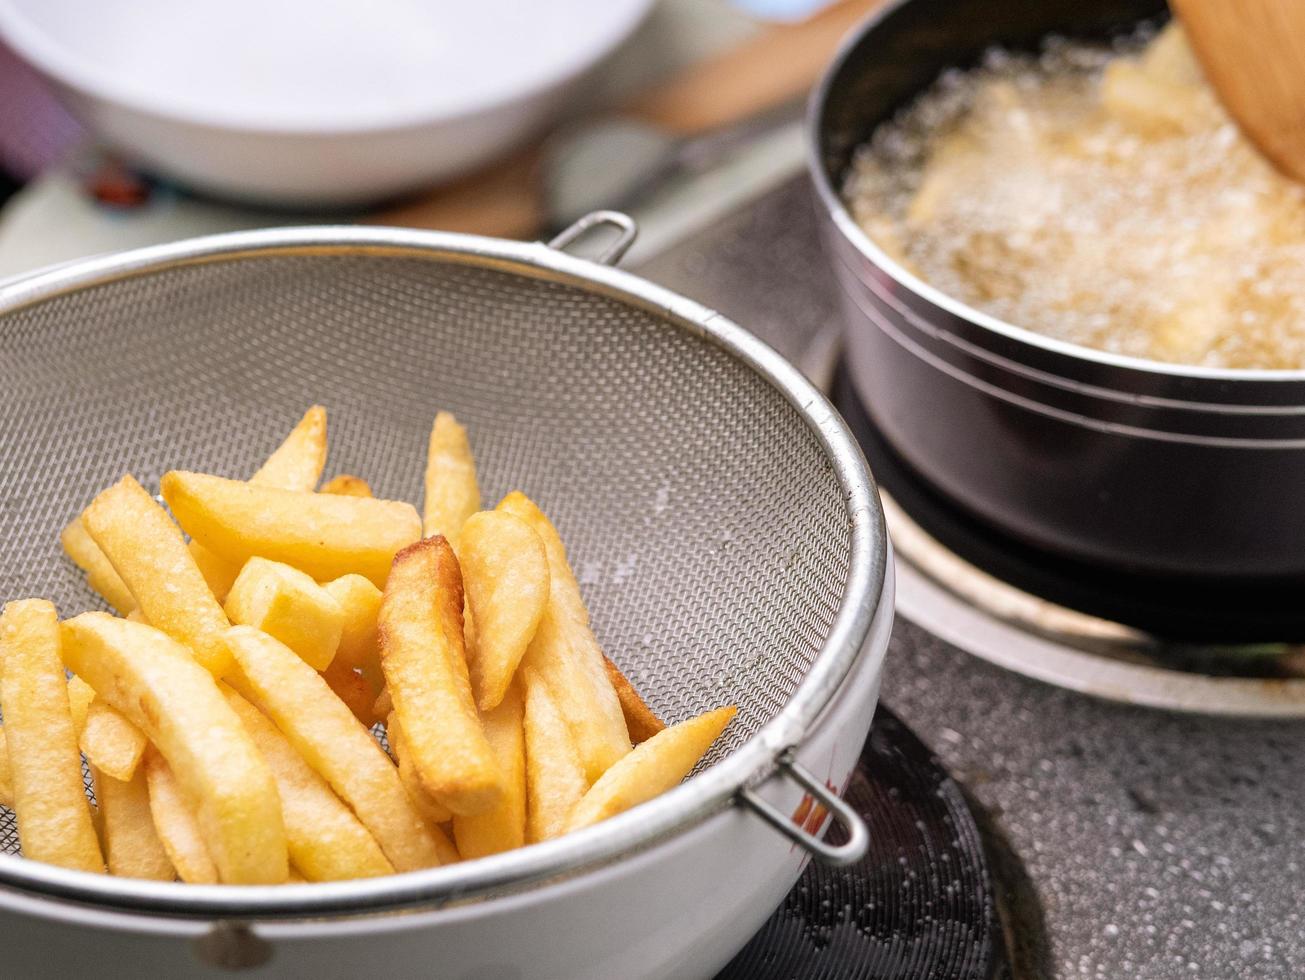 https://static.vecteezy.com/system/resources/previews/003/735/775/non_2x/frying-french-fries-in-the-fryer-in-hot-oil-on-the-electric-stove-in-the-kitchen-and-french-fries-in-a-basket-to-drain-the-oil-making-homemade-french-fries-selective-focus-free-photo.jpg